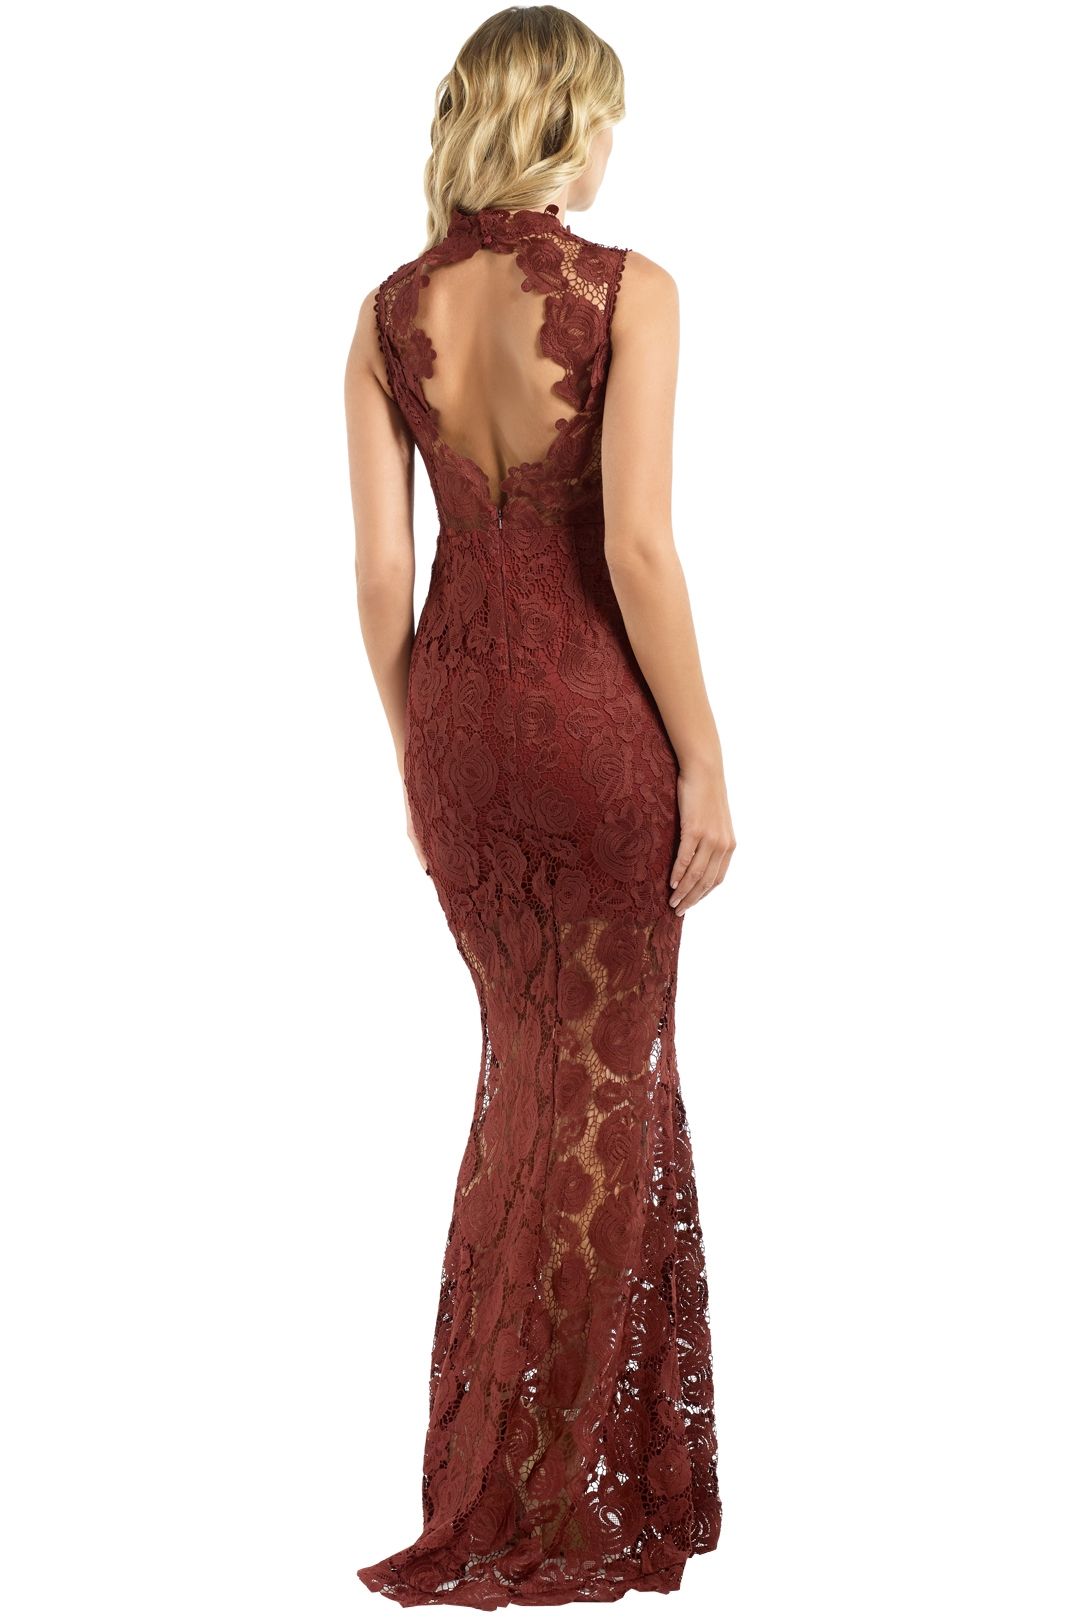 Grace and Hart - Espresso Gown - Red - Back